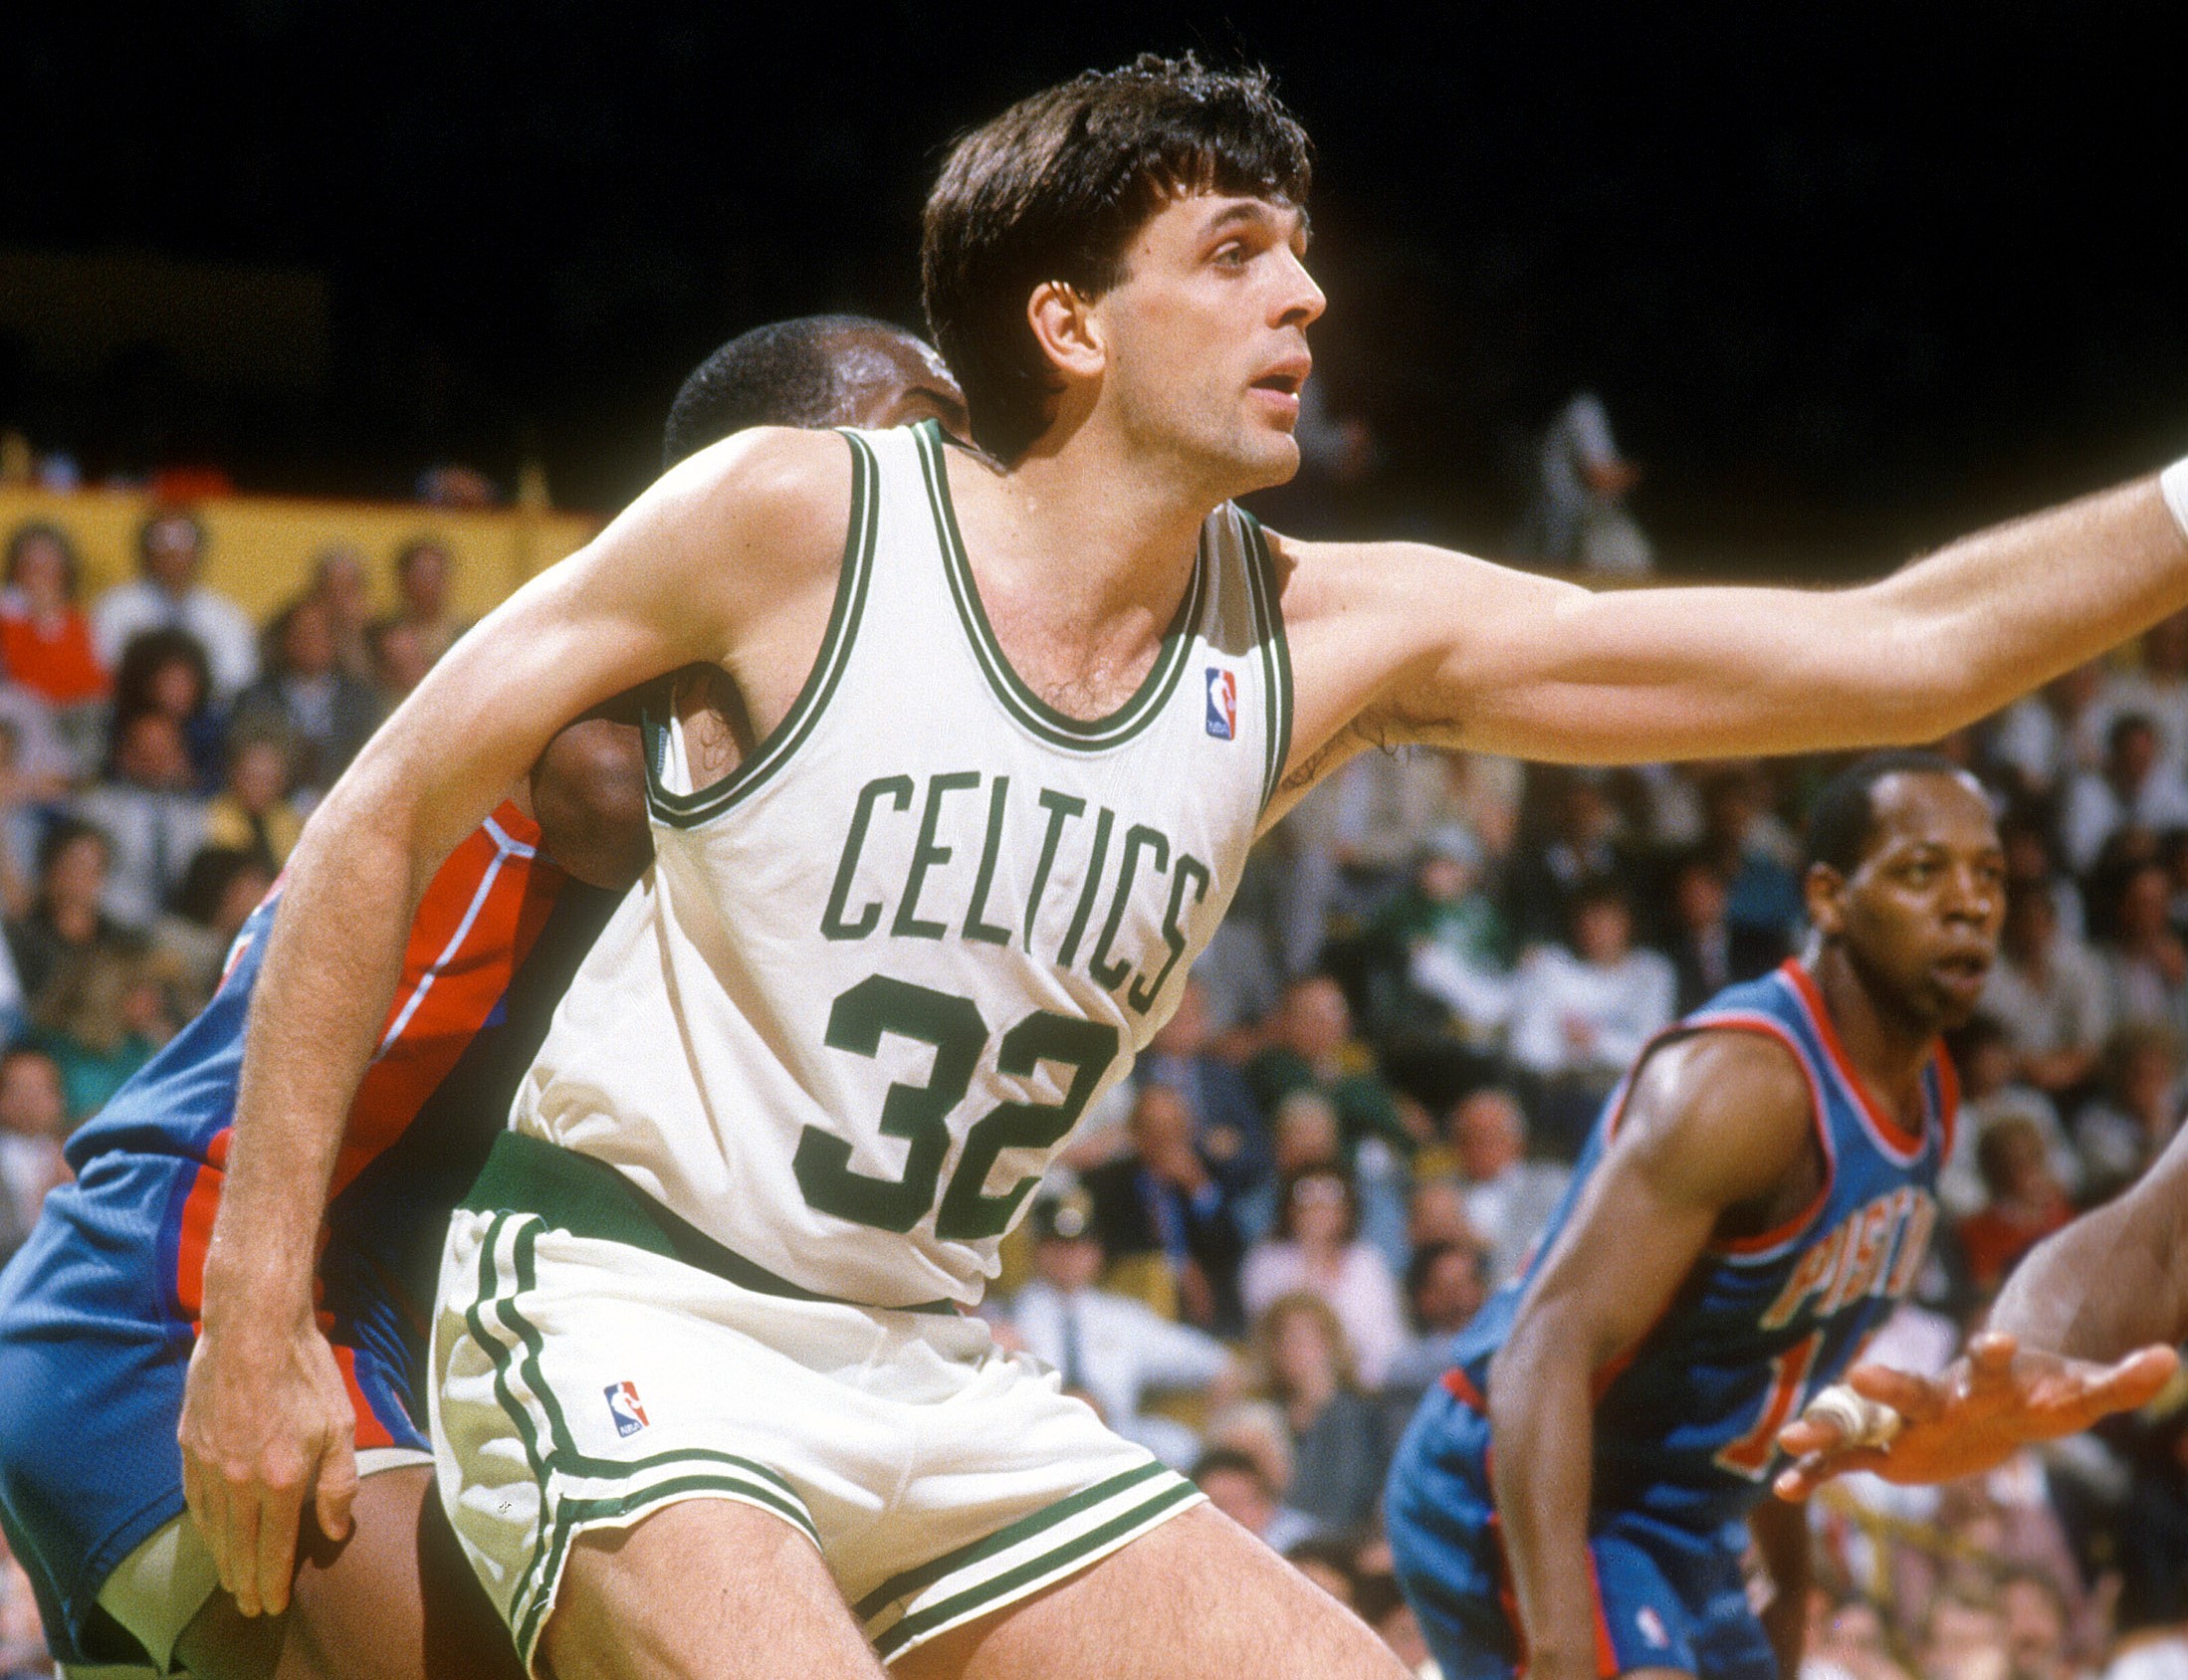 Kevin McHale recalls how Red Auerbach surprised him in the 1980 NBA Draft